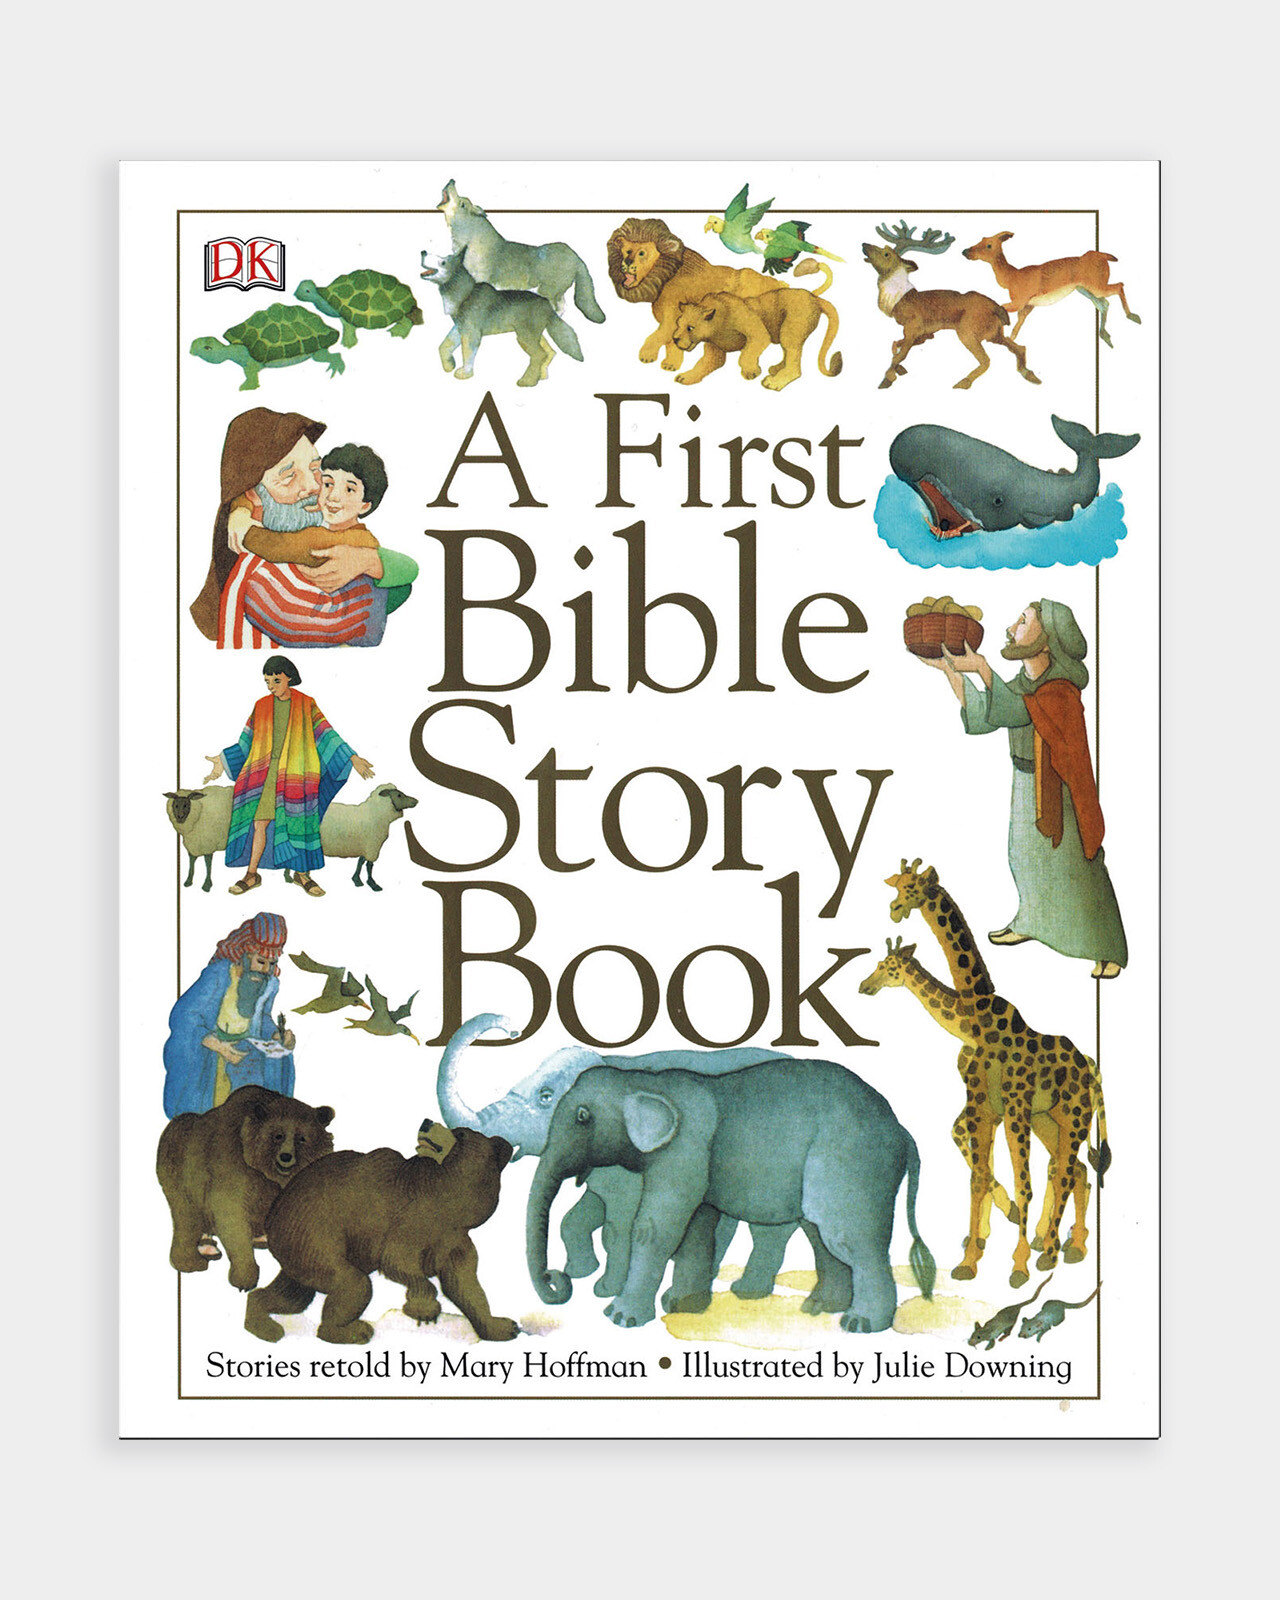 DK First Bible Story book | The Leprosy Mission Shop | The Leprosy Mission  Shop